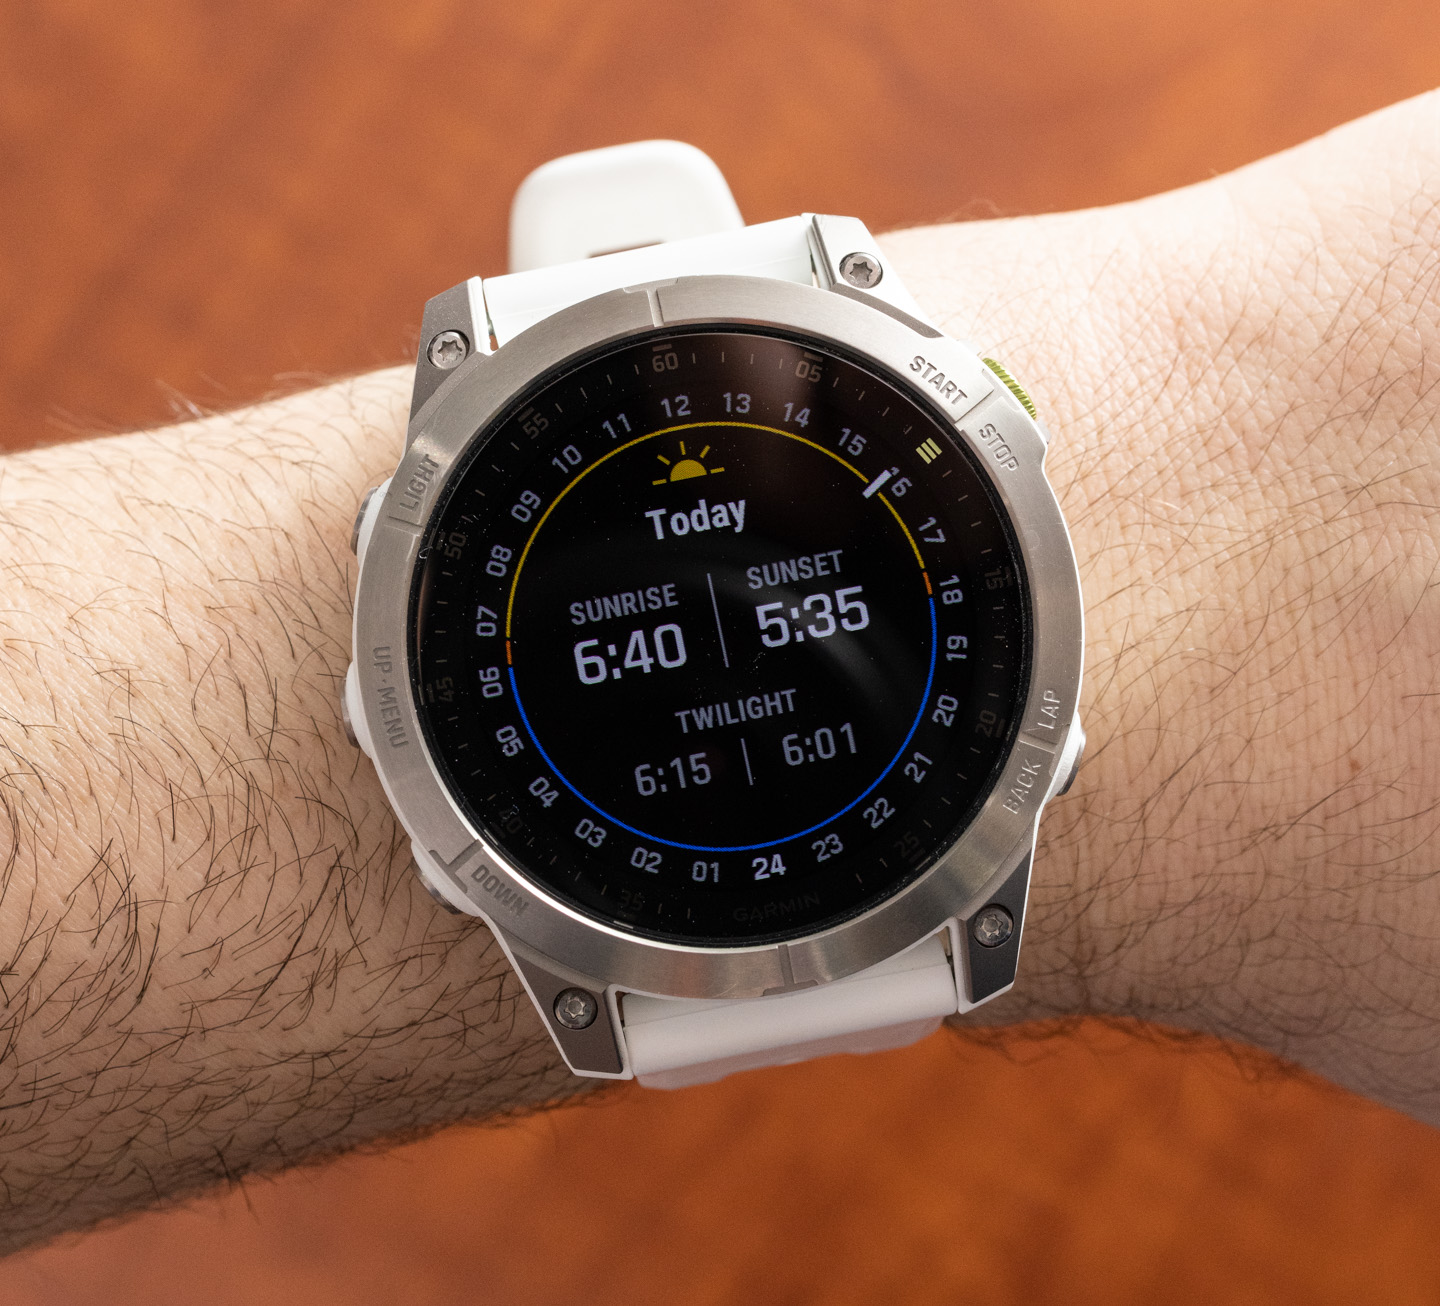 The Garmin Epix Gen 2 Smart Watch Carrying on the Baton of Excellence -  Strapcode